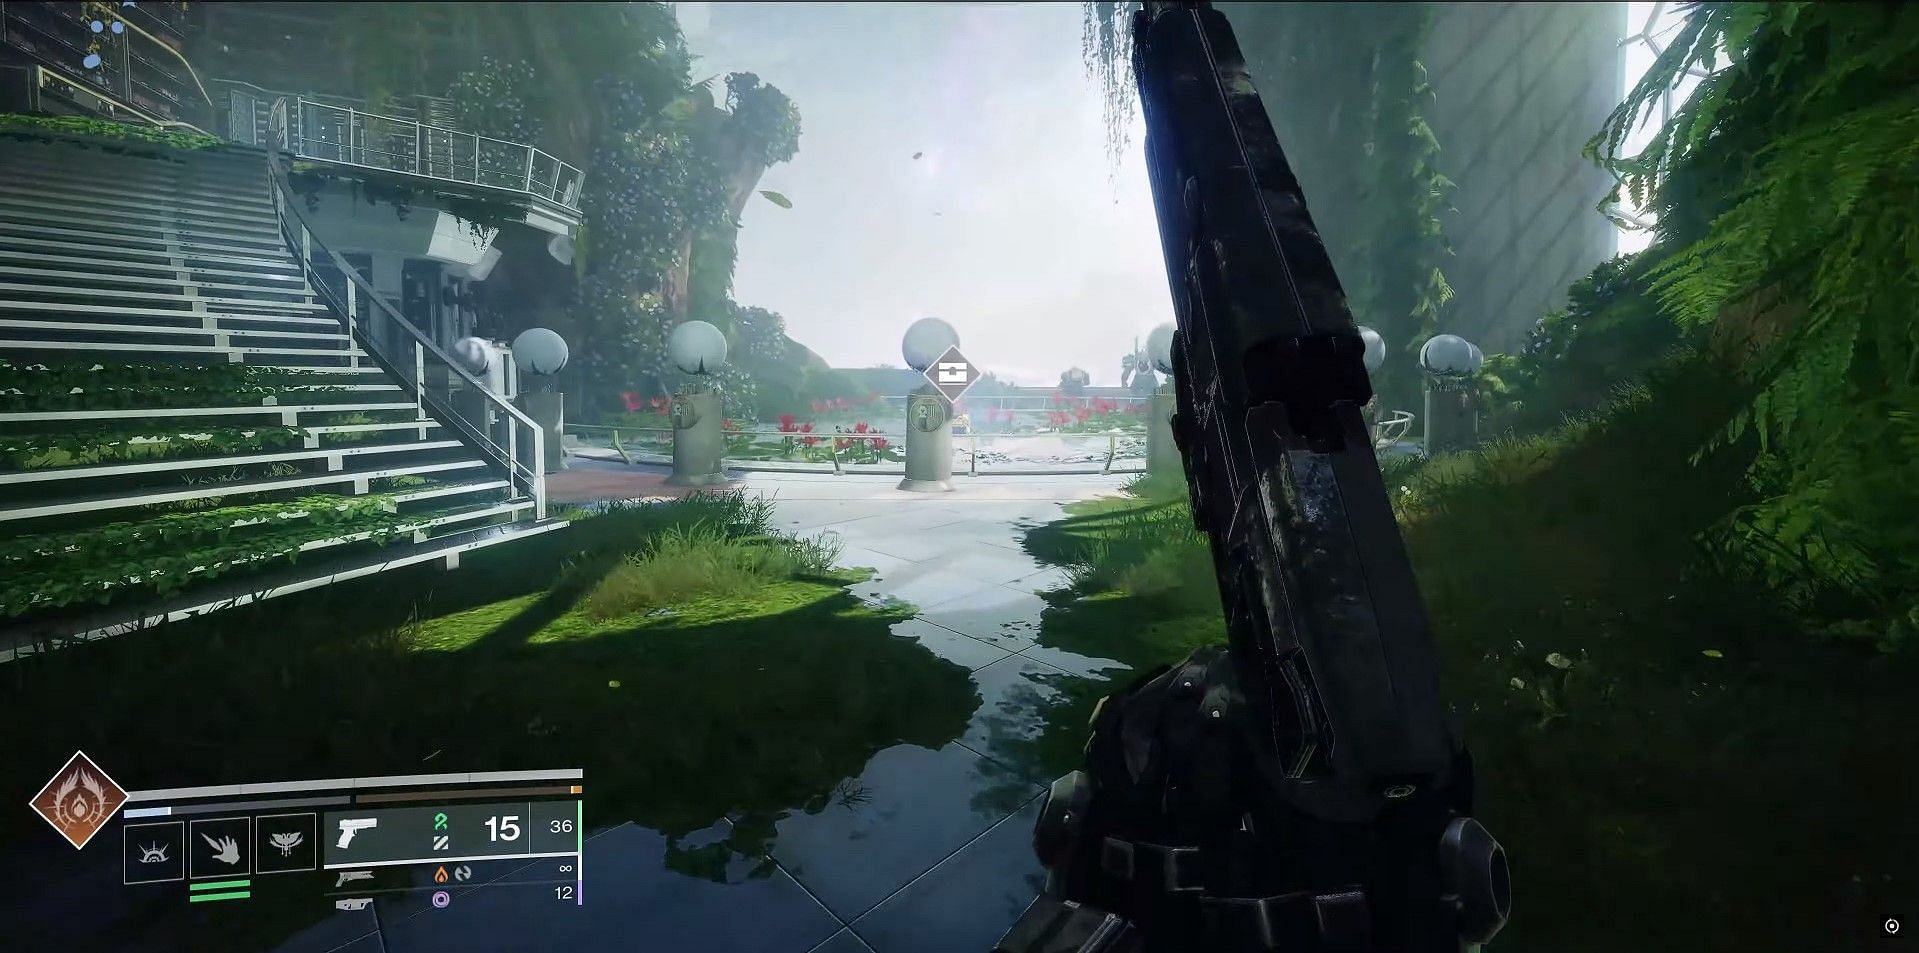 Final chest location in the Pale Heart tower of Destiny 2 (Image via Esoterickk)